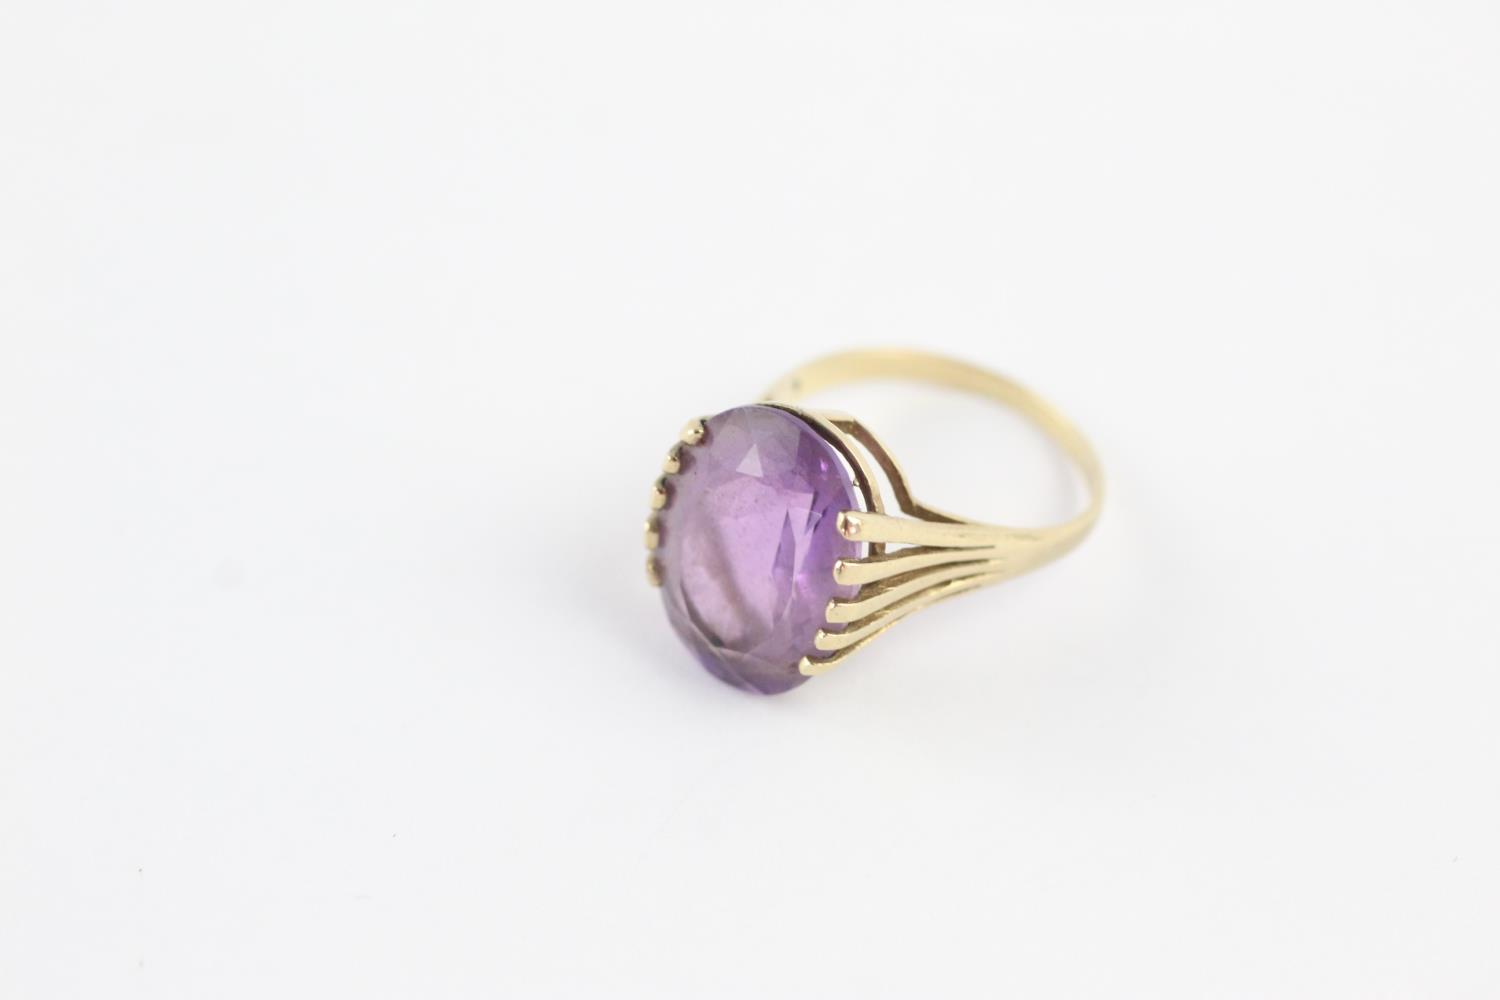 9ct gold amethyst high profile setting cocktail ring (3.8g) size O - Image 9 of 9